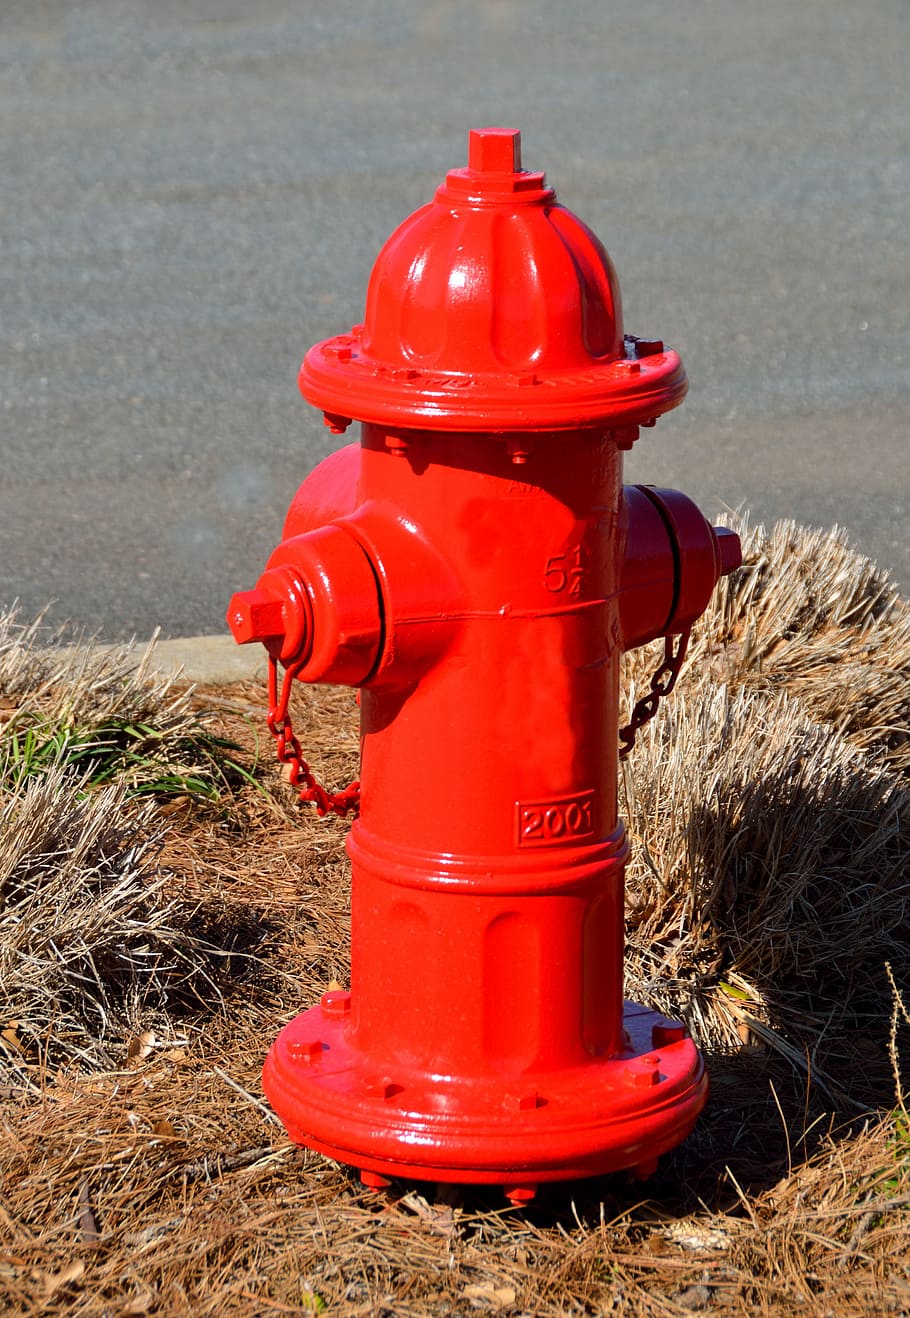 Fire Hydrant, Safety, red, hydrant, emergency, plug, protection, rescue, danger, hose